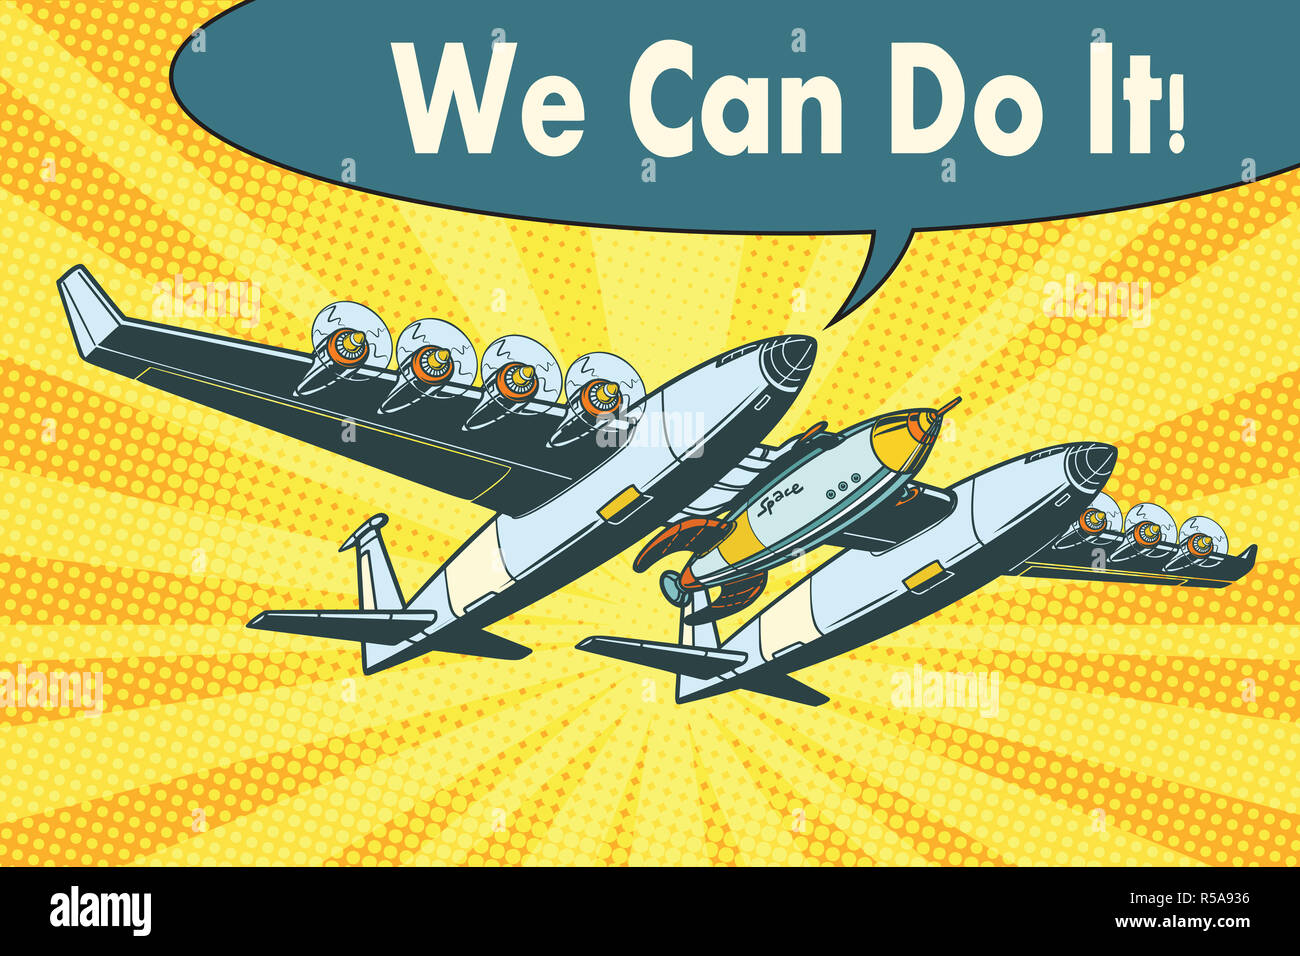 Airplane to send rockets into space we can do it Stock Photo